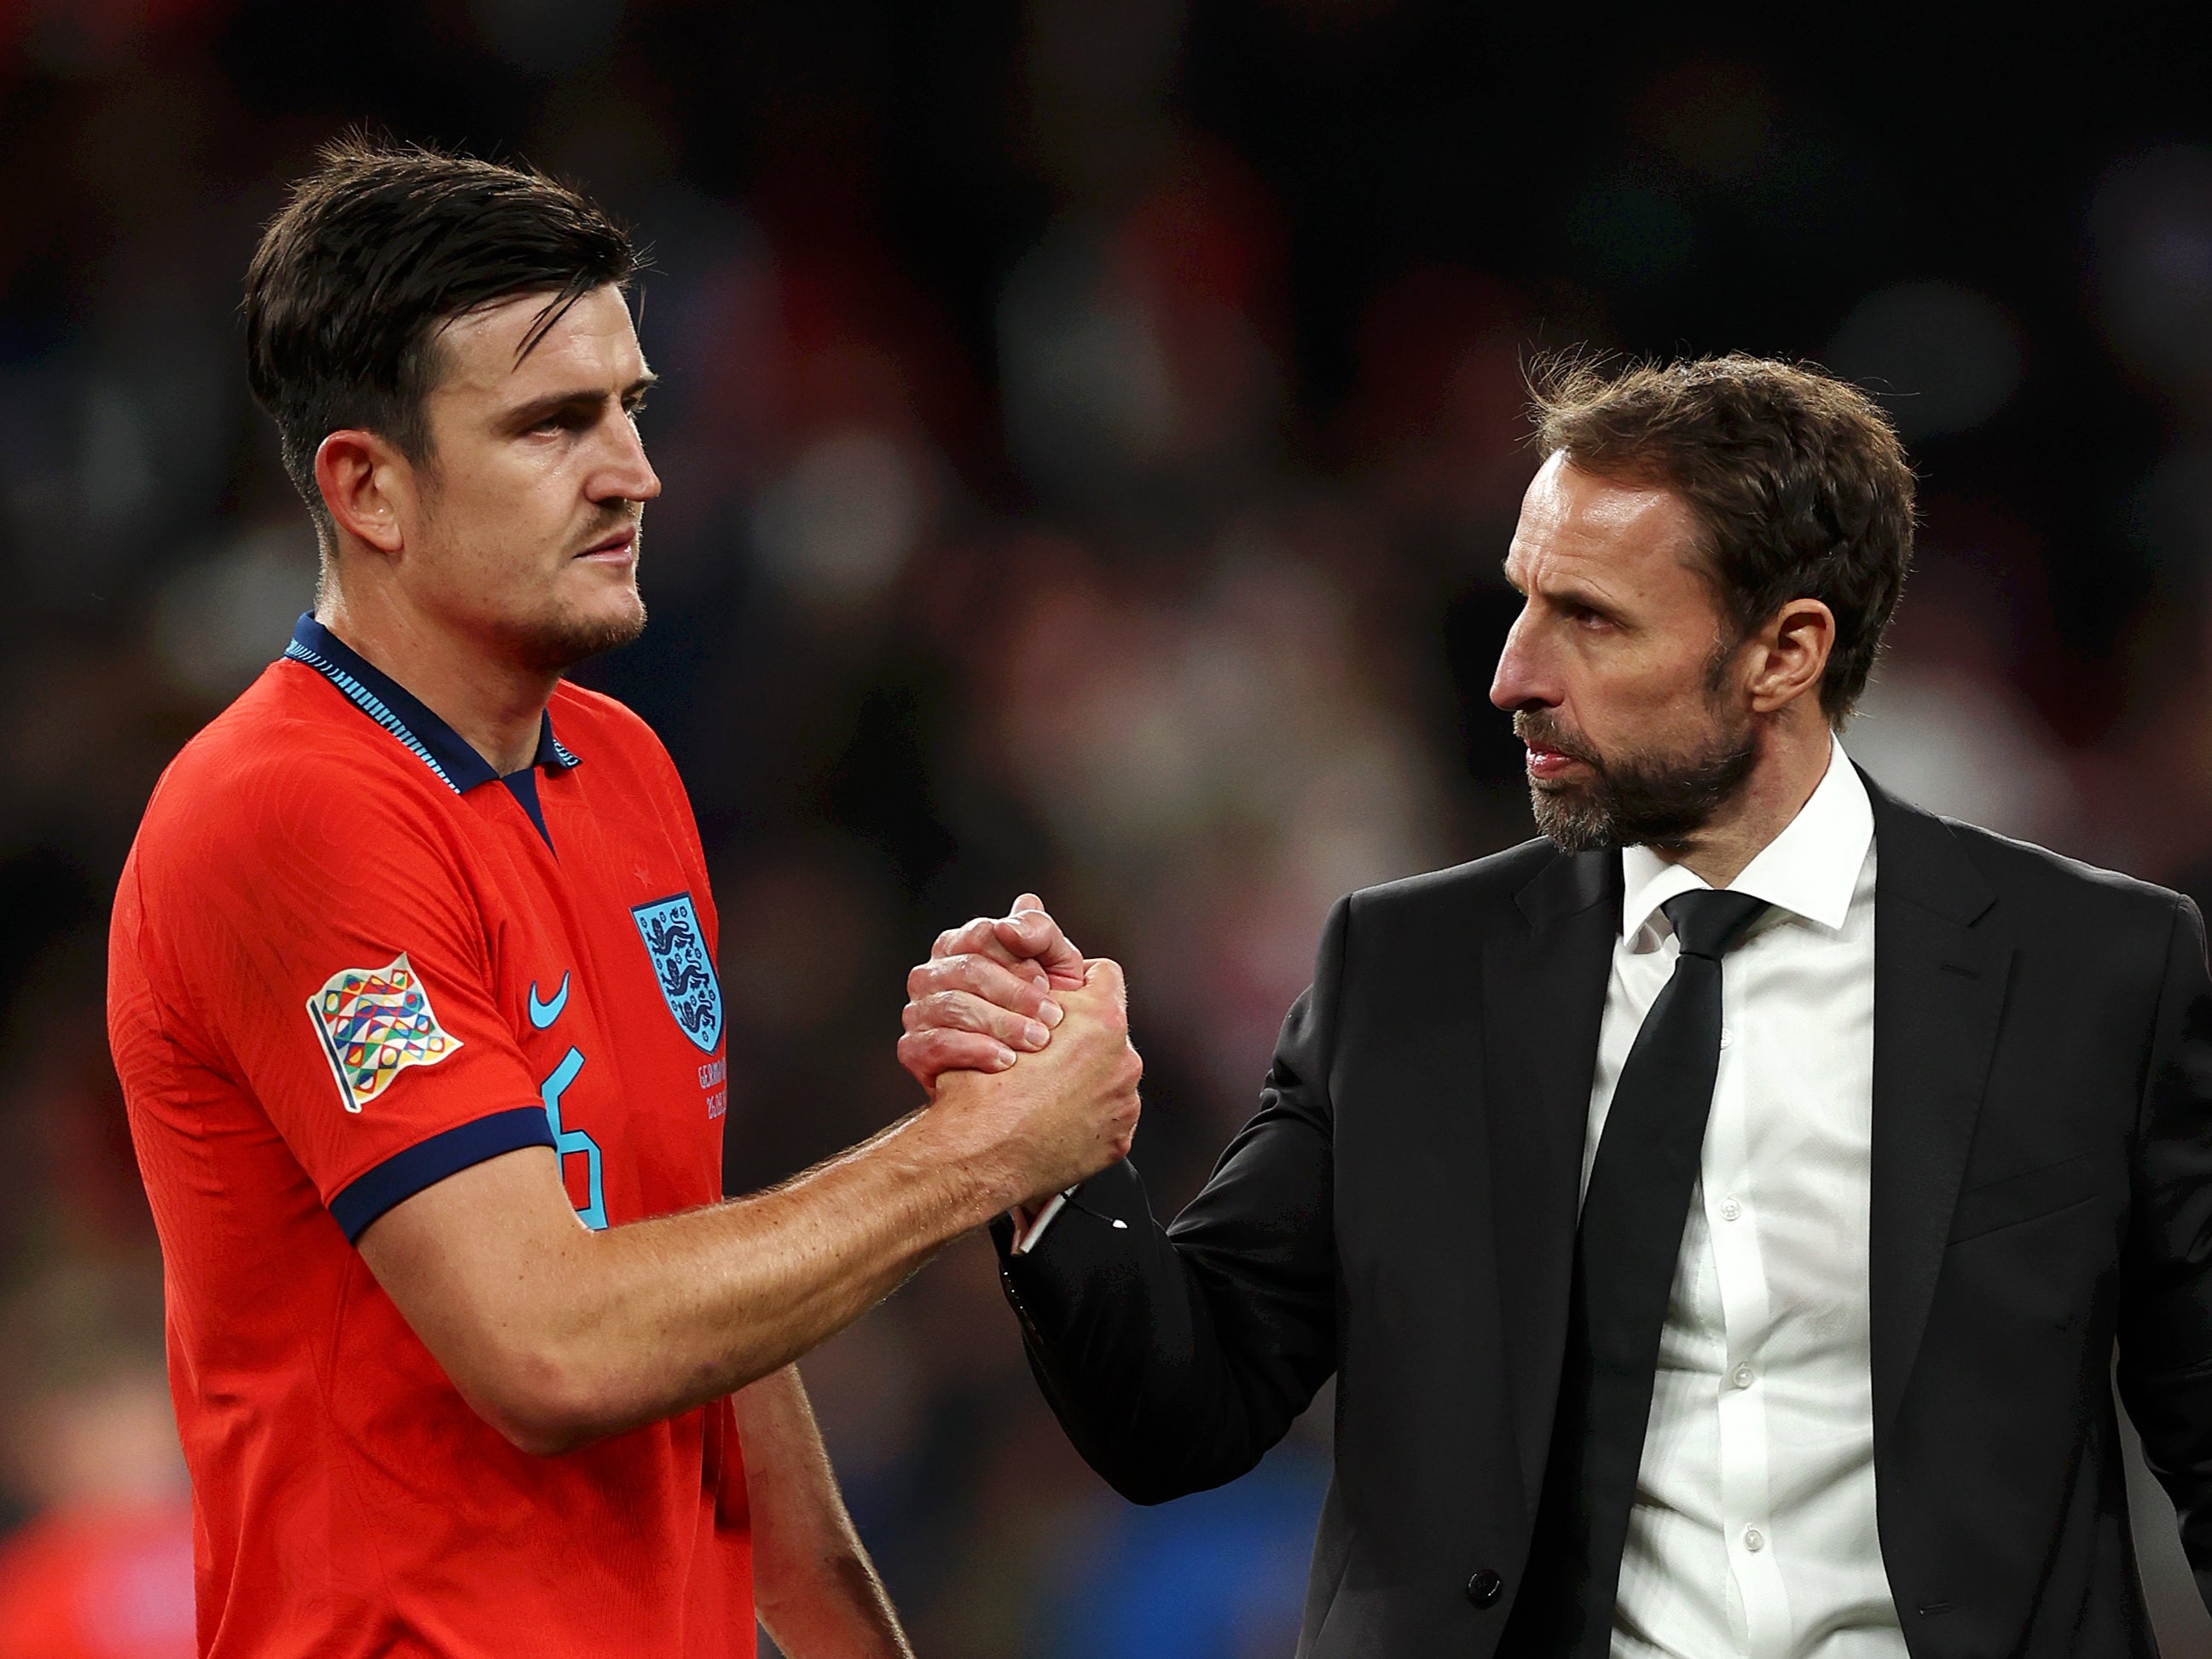 Gareth Southgate kept faith in Harry Maguire, while England’s players have not turned on their coach